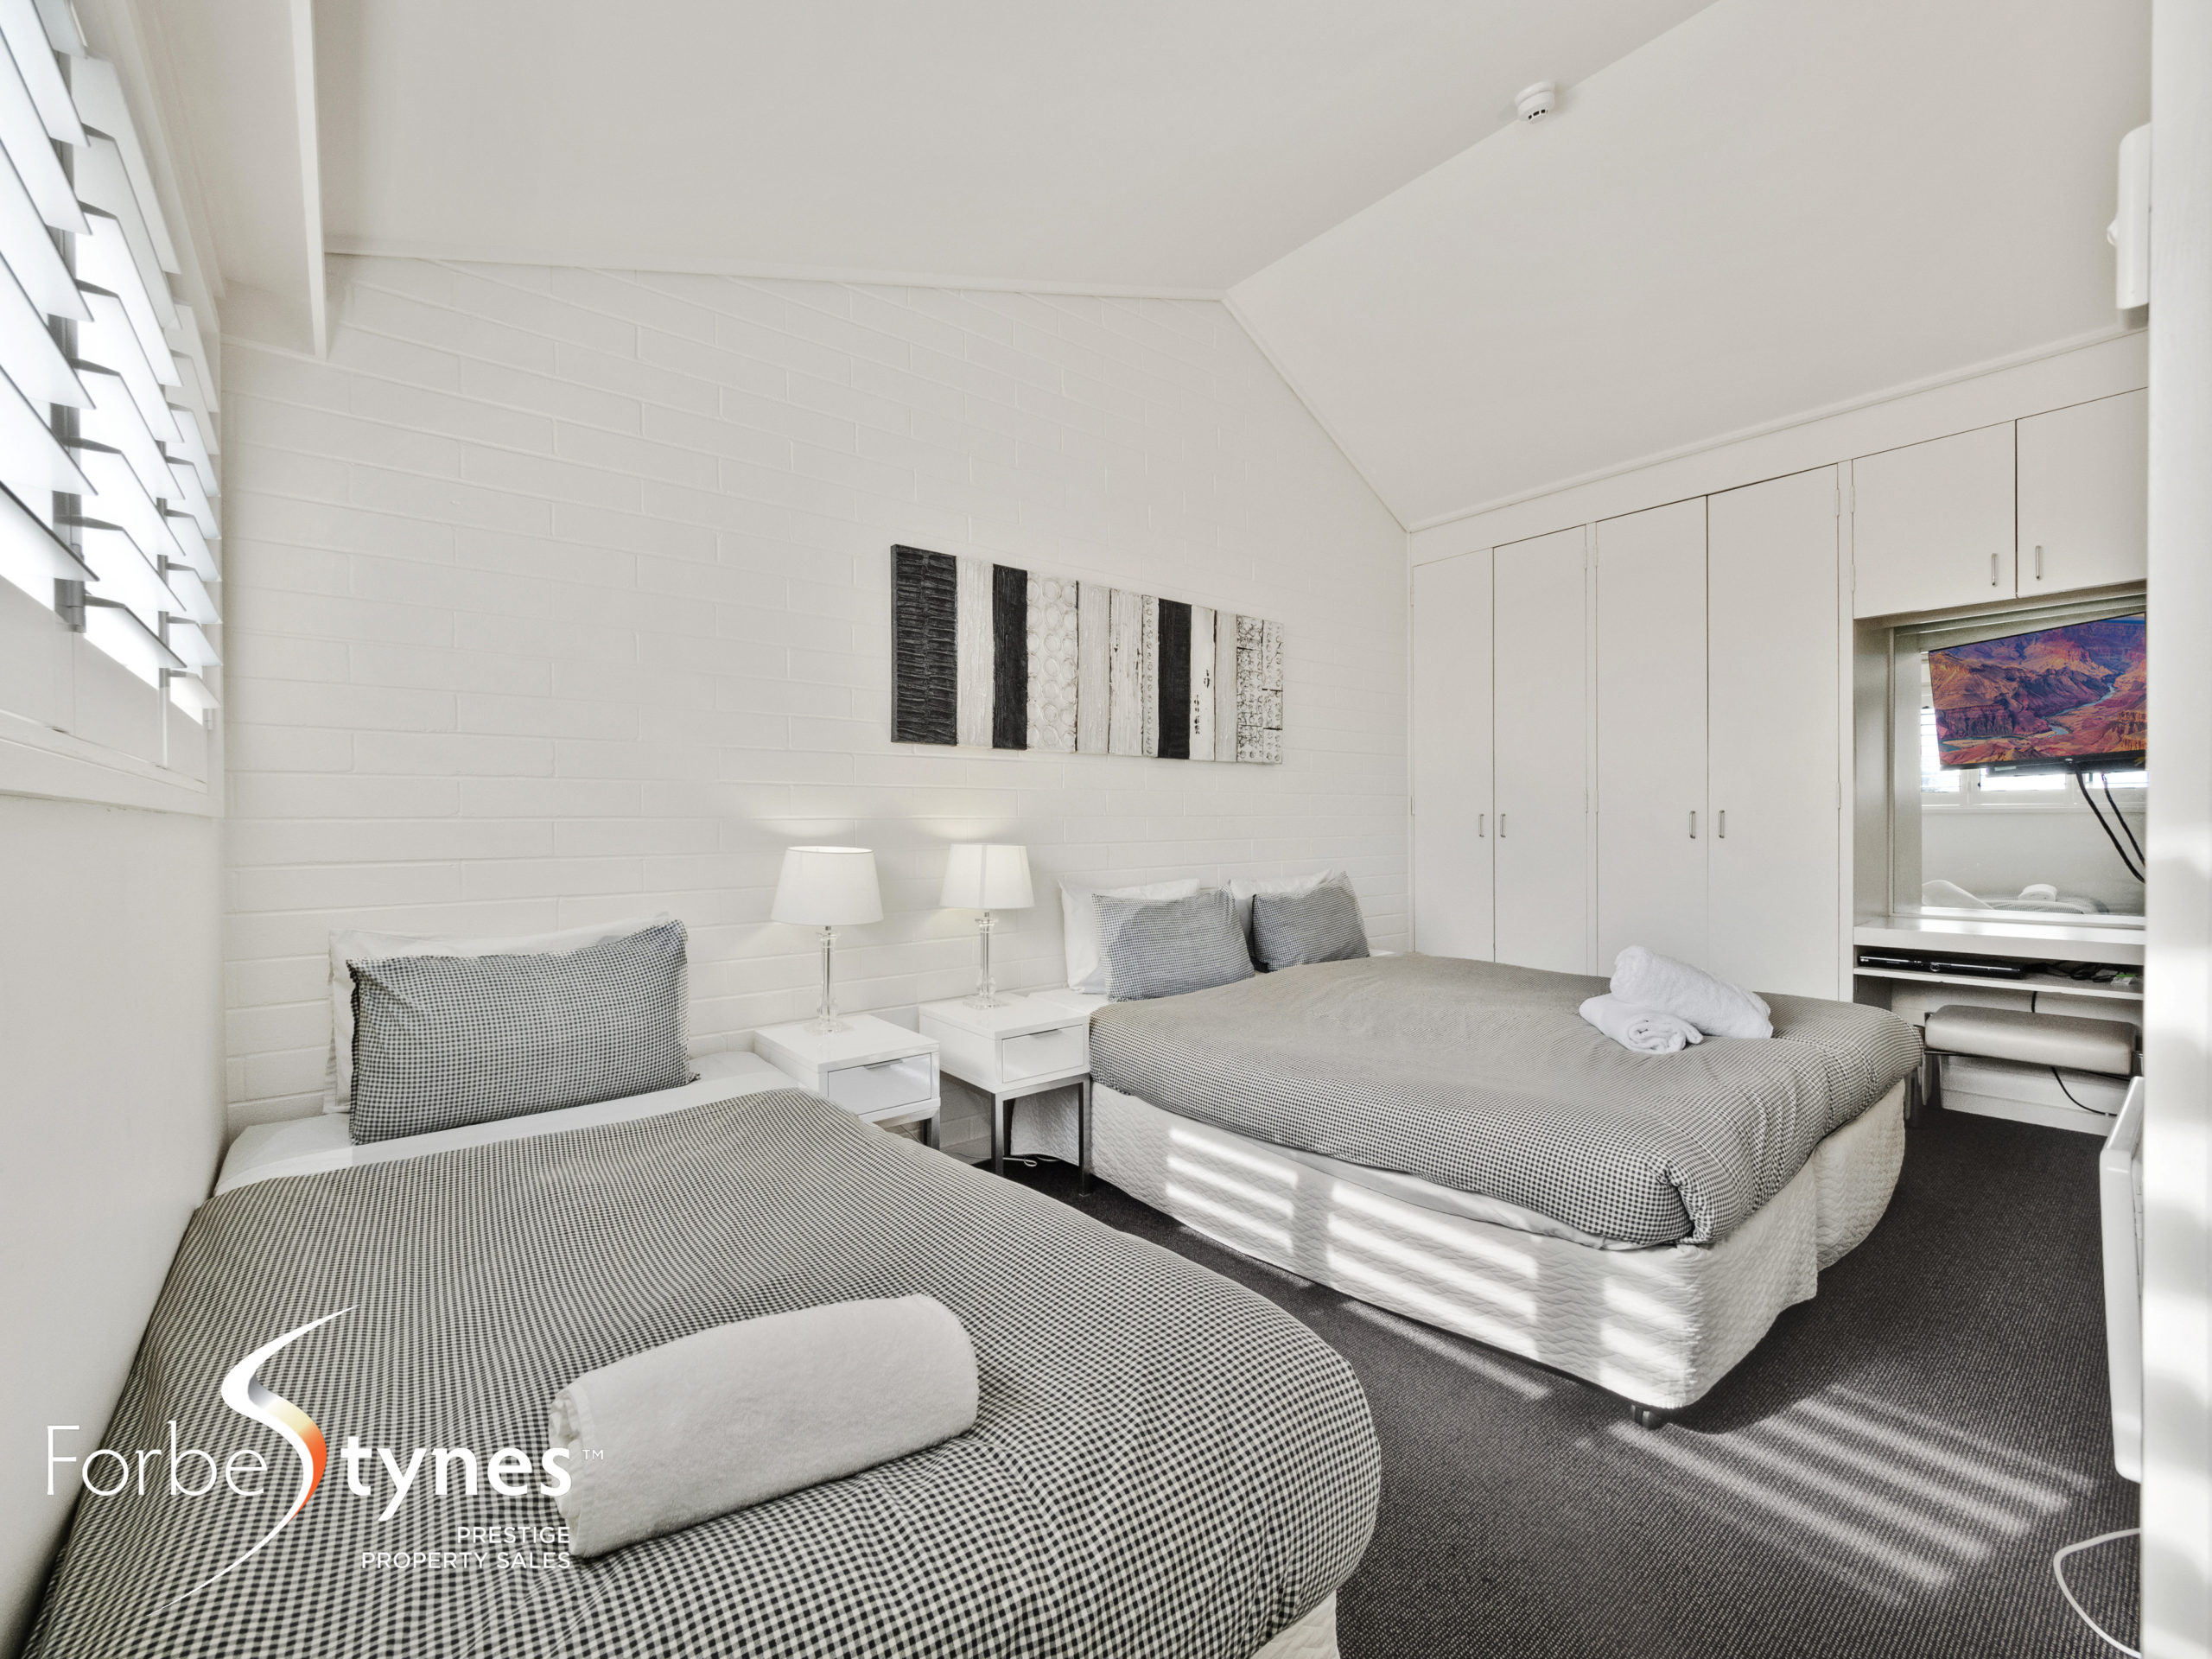 One Bedroom Thredbo Alpine Apartment for Sale with Car Park<br>$820,000